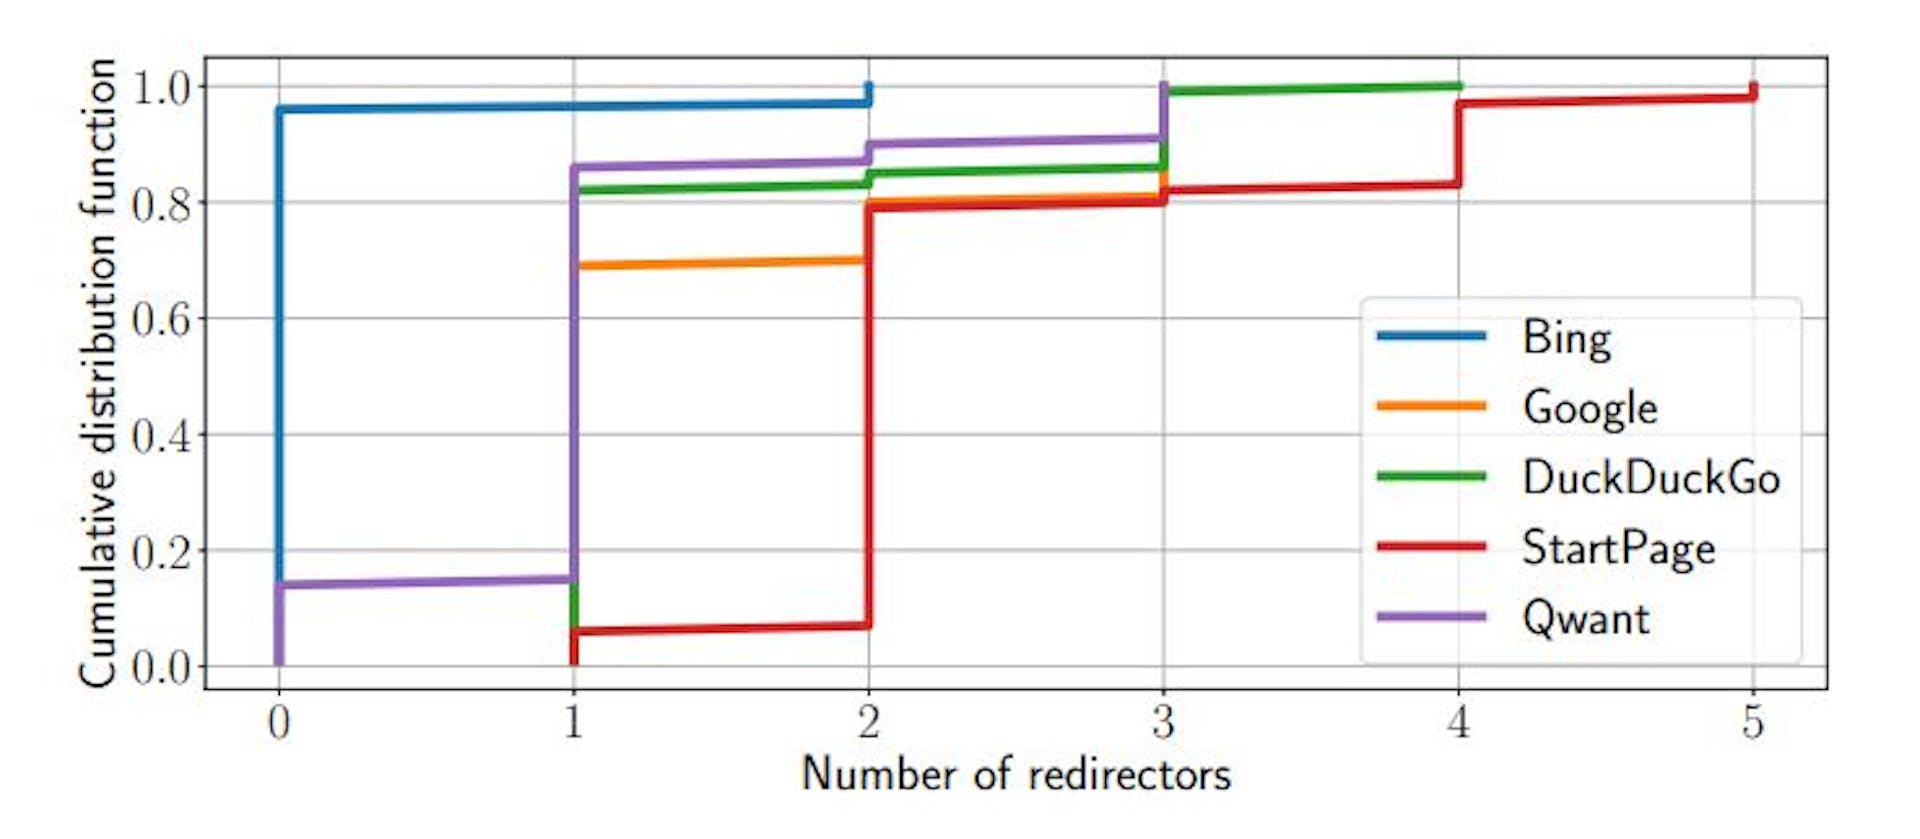 Figure 4: CDF of the number of different redirectors for Bing, DuckDuckGo, Google, and StartPage.